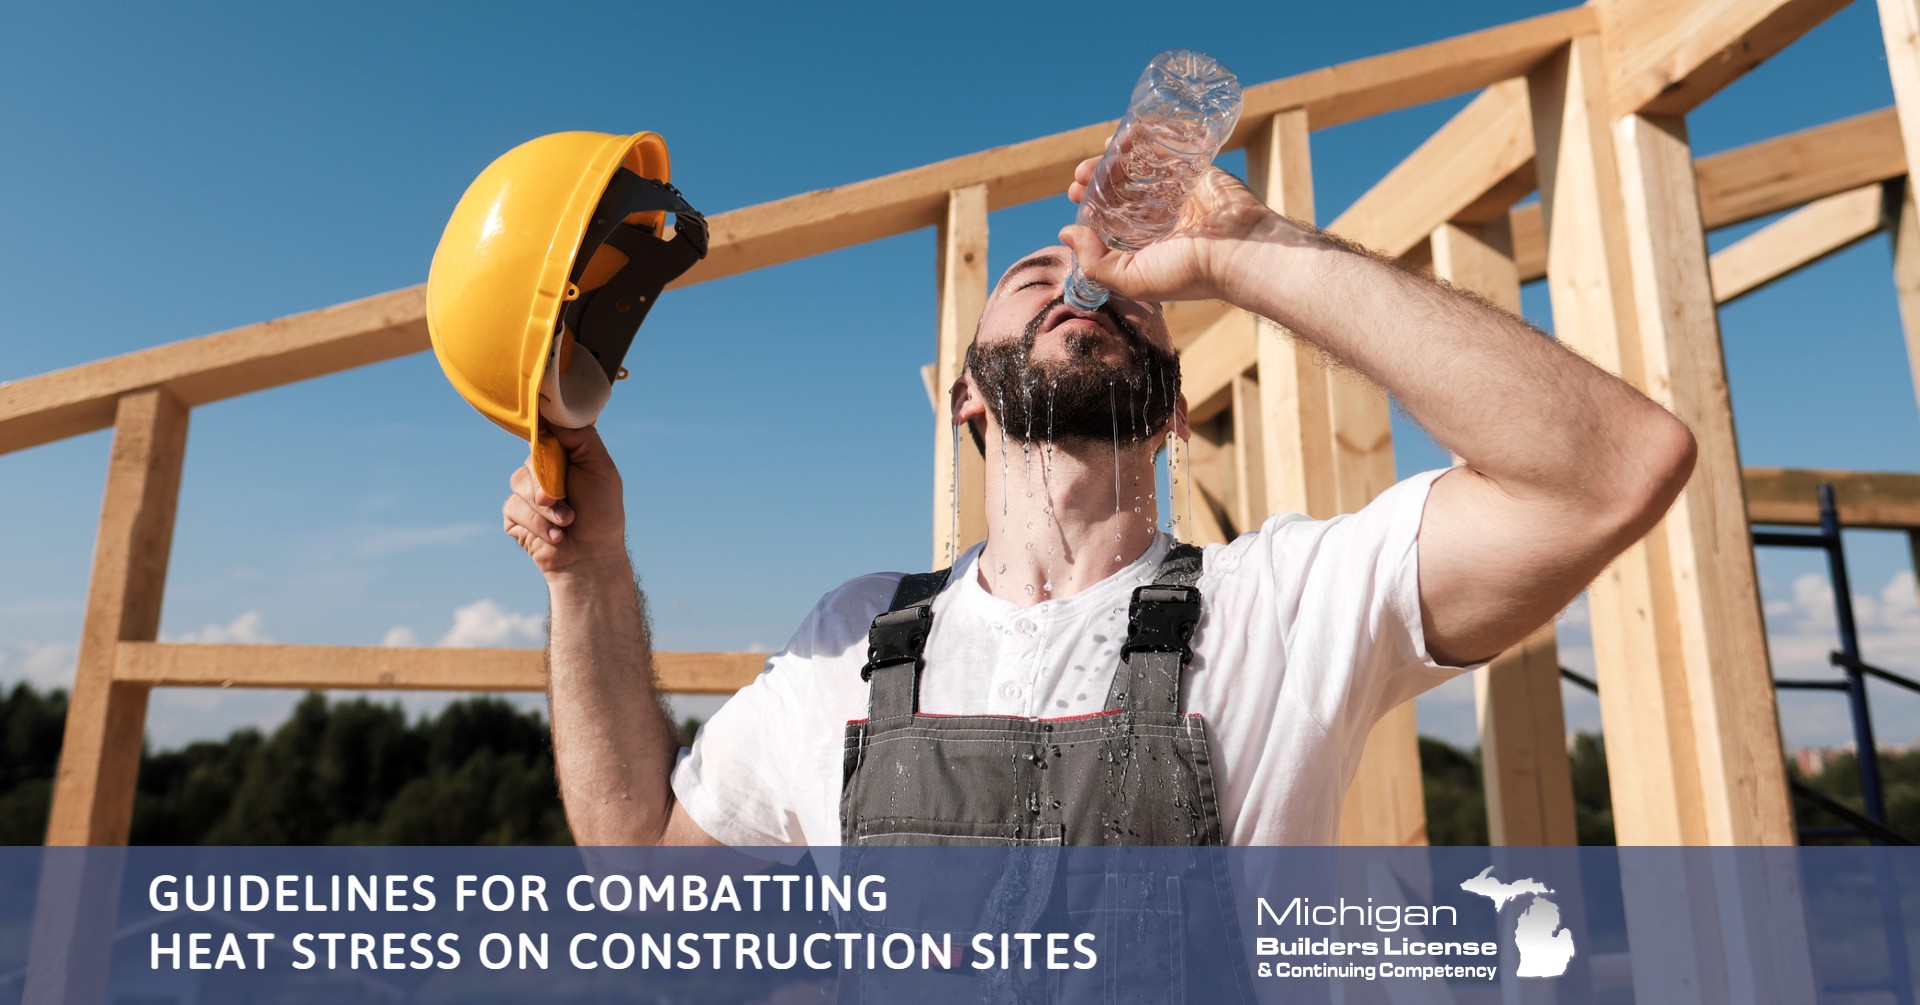 How To Combat Heat Stress On Construction Sites